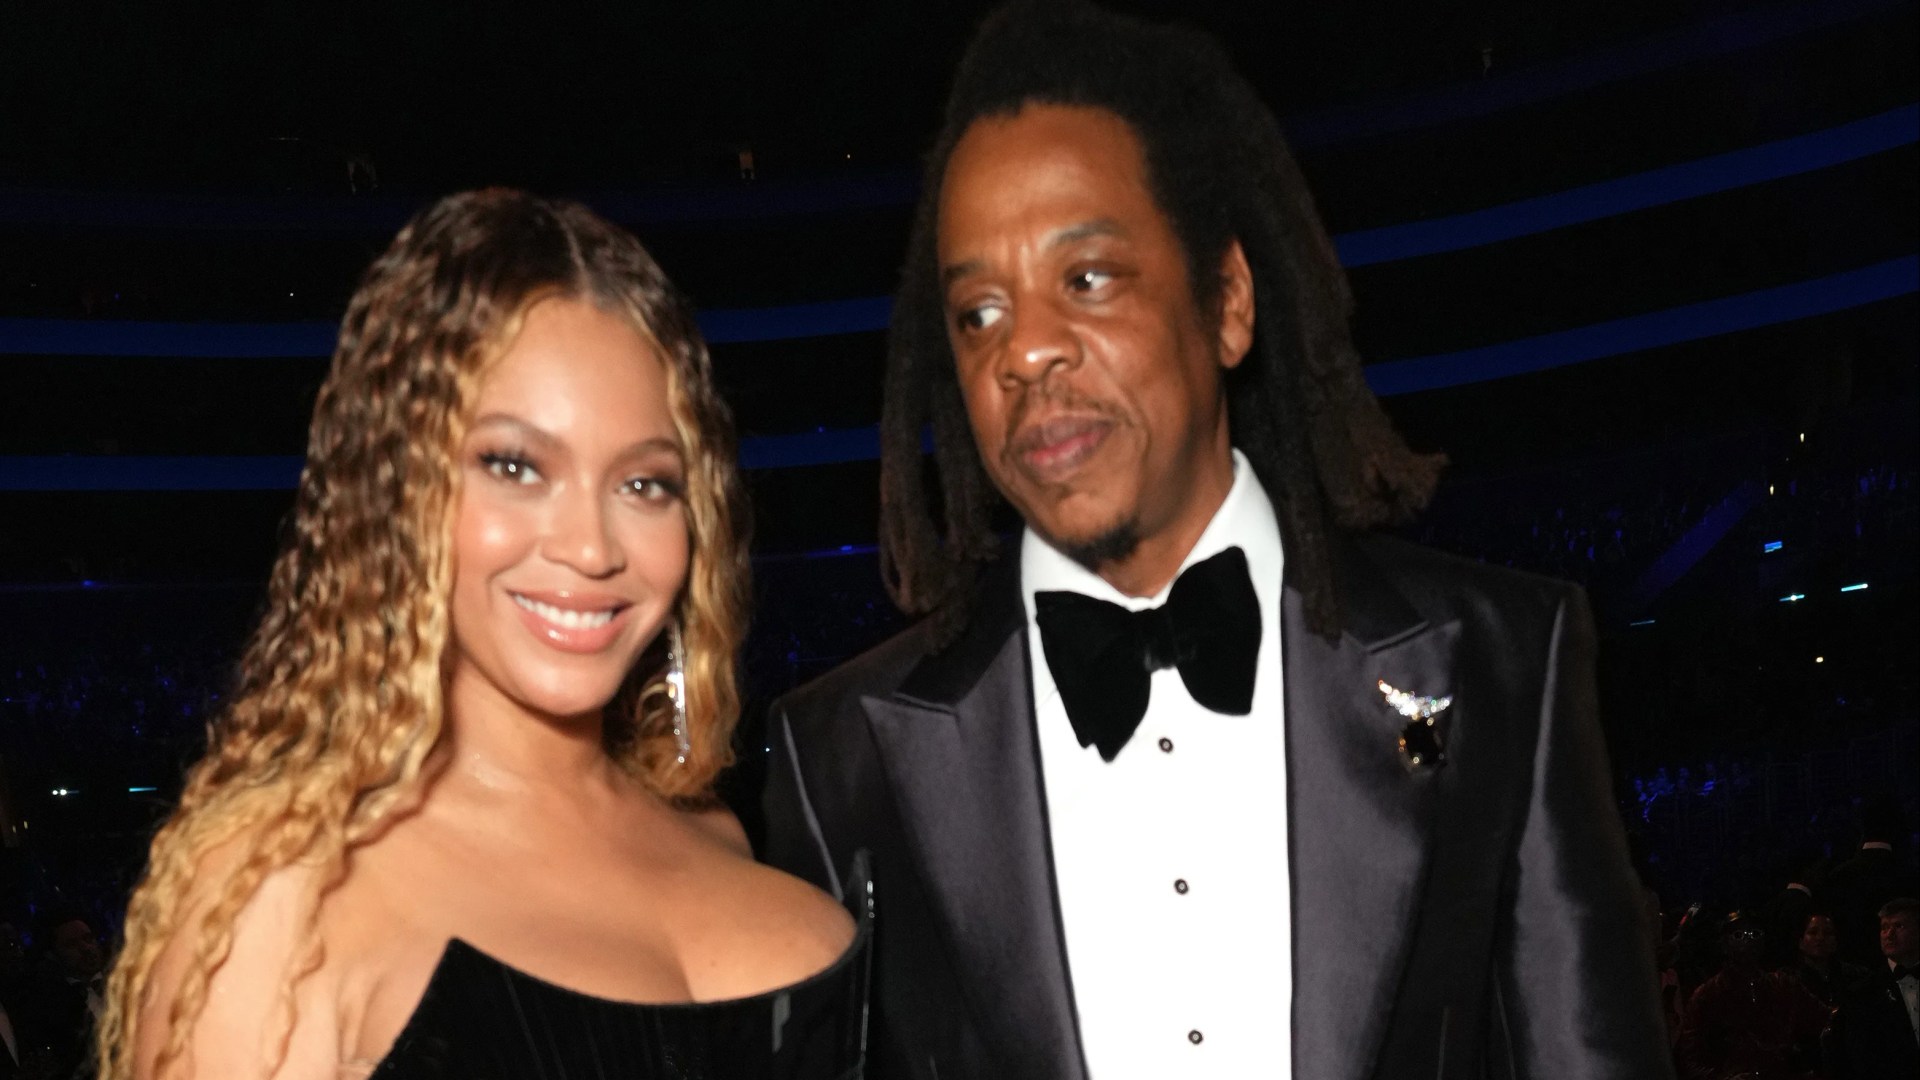 Beyoncé shocks fans with Grammy Awards diss and Jay Z cheating scandal confessions on powerful new country album